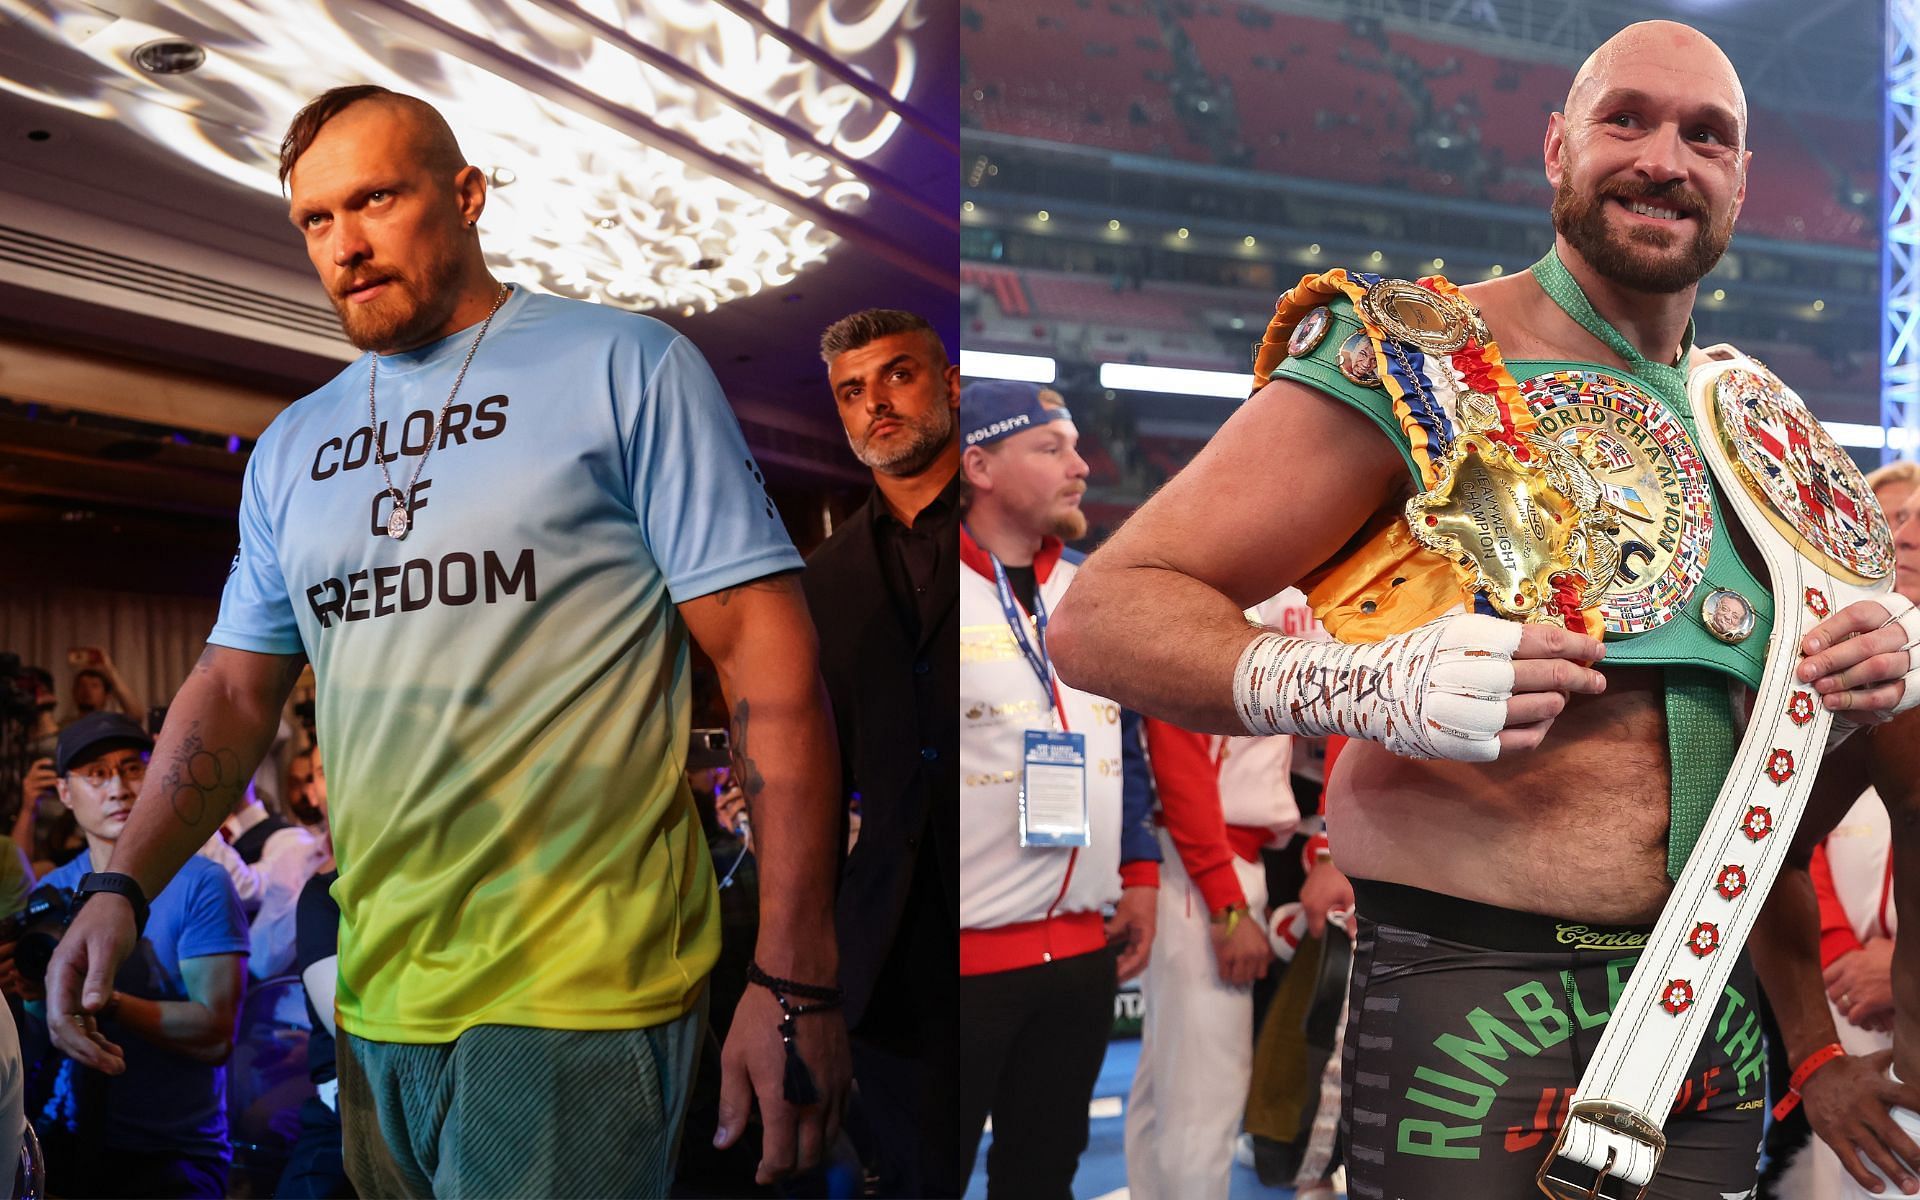 Oleksandr Usyk (left) and Tyson Fury (right) (Image credits Getty Images)